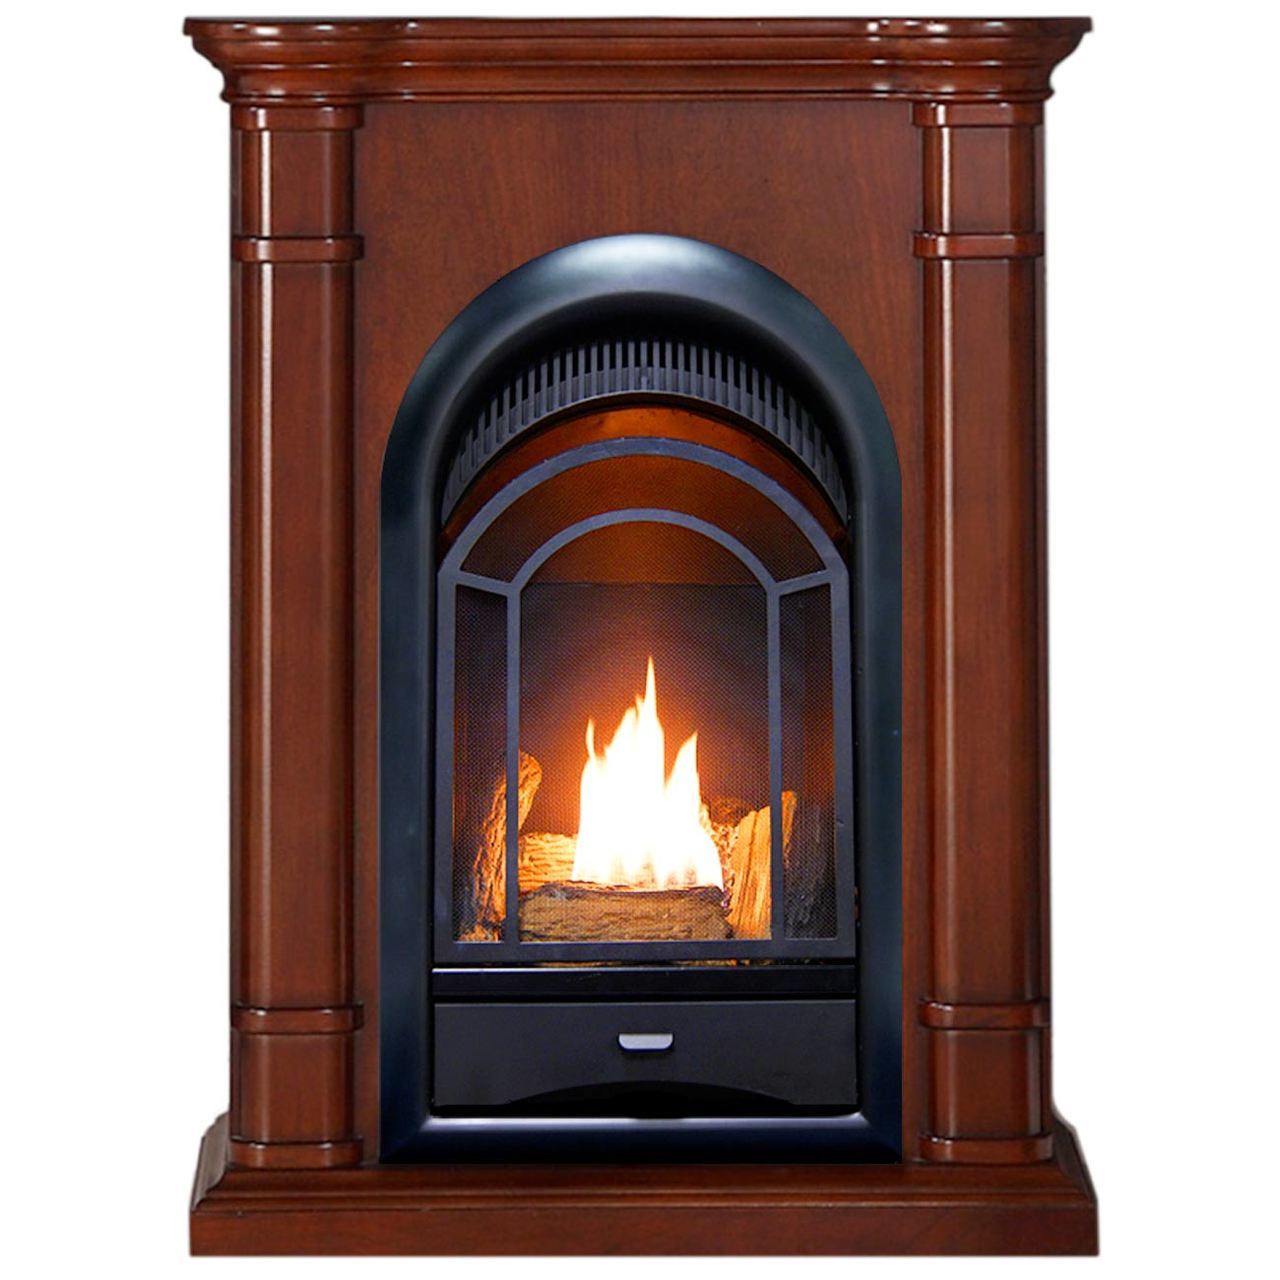 Vent Free Wall Mount Gas Fireplace Lovely Pro Fs100t 3w Ventless Fireplace System 10k Btu Duel Fuel thermostat Insert and Walnut Mantel